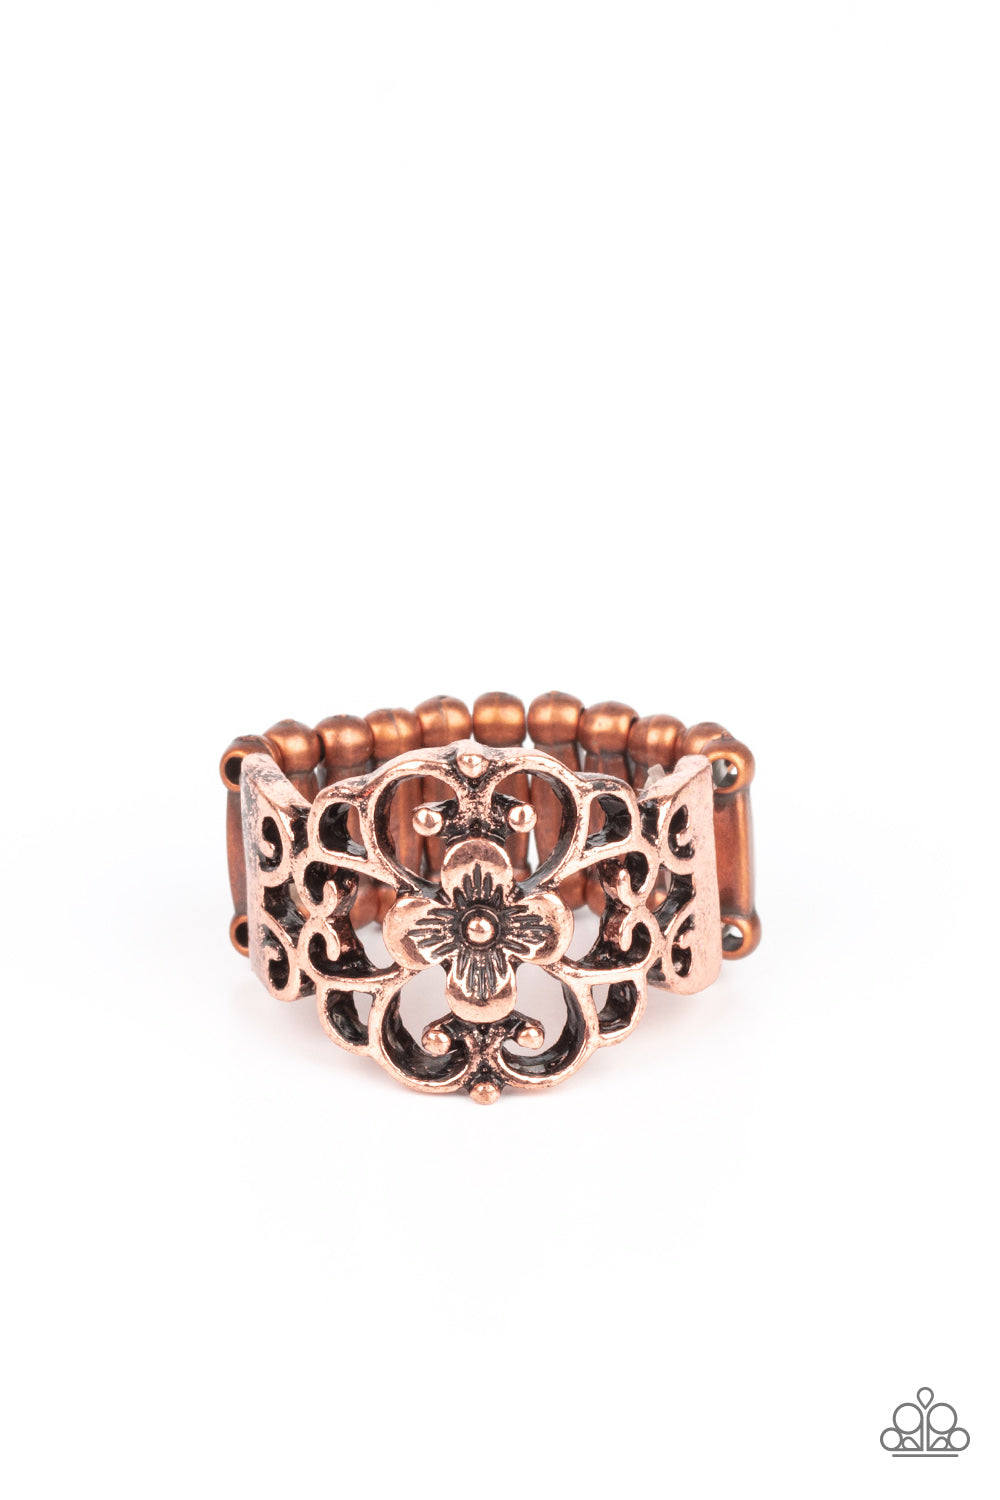 Paparazzi Accessories Fanciful Flower Gardens - Copper